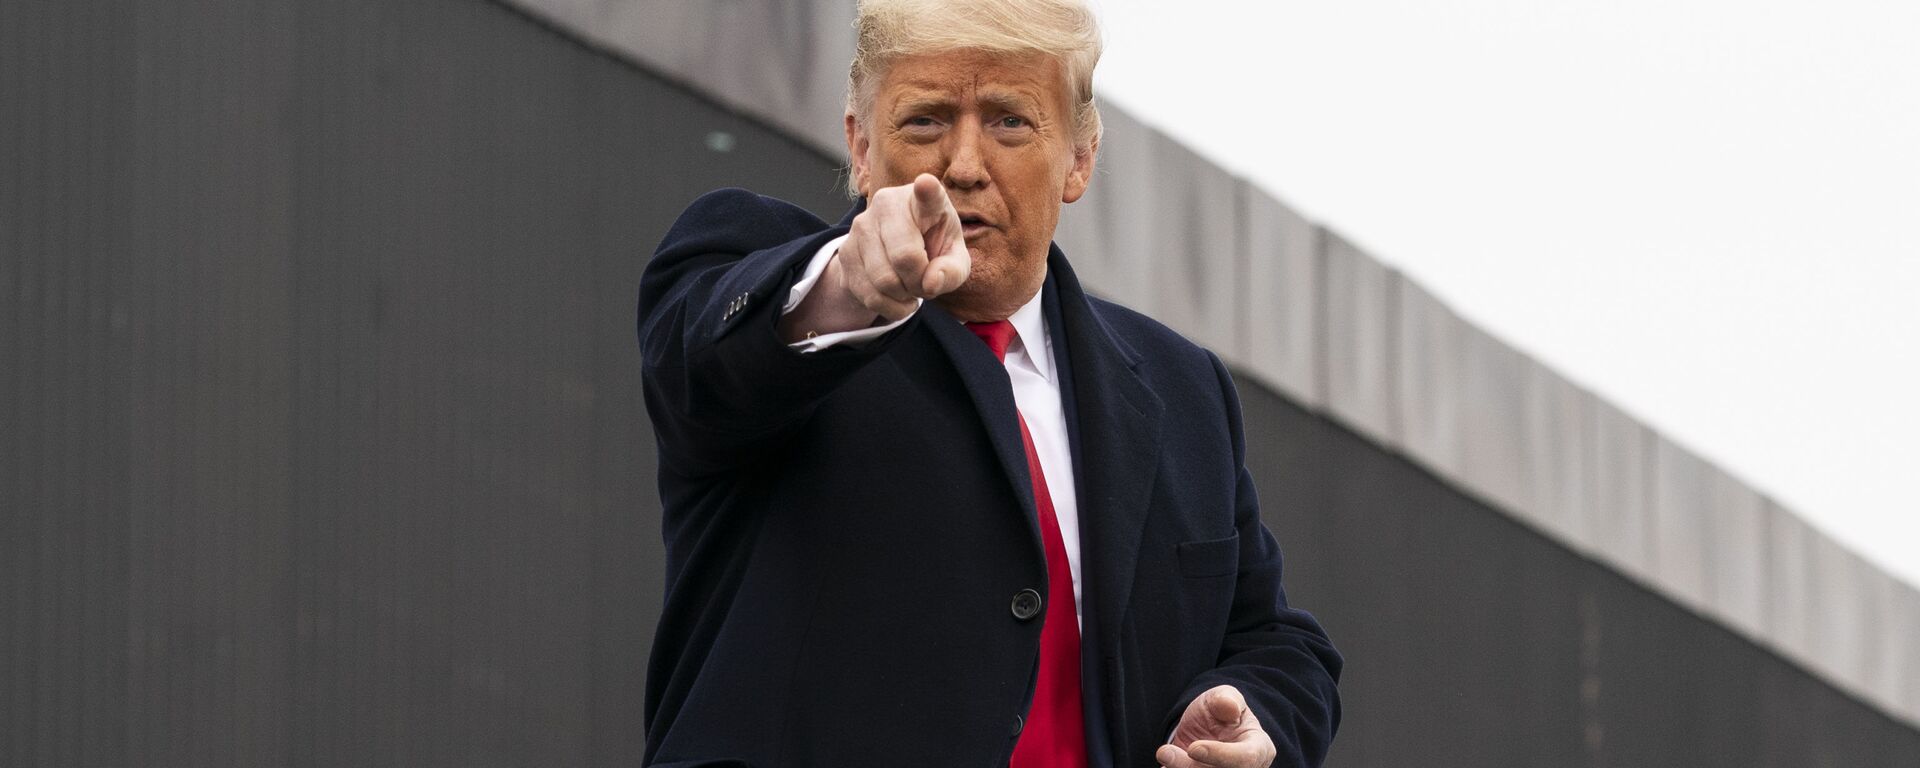 President Donald Trump points to a member of the audience after speaking near a section of the U.S.-Mexico border wall, Tuesday, Jan. 12, 2021, in Alamo, Texas - Sputnik International, 1920, 03.02.2021